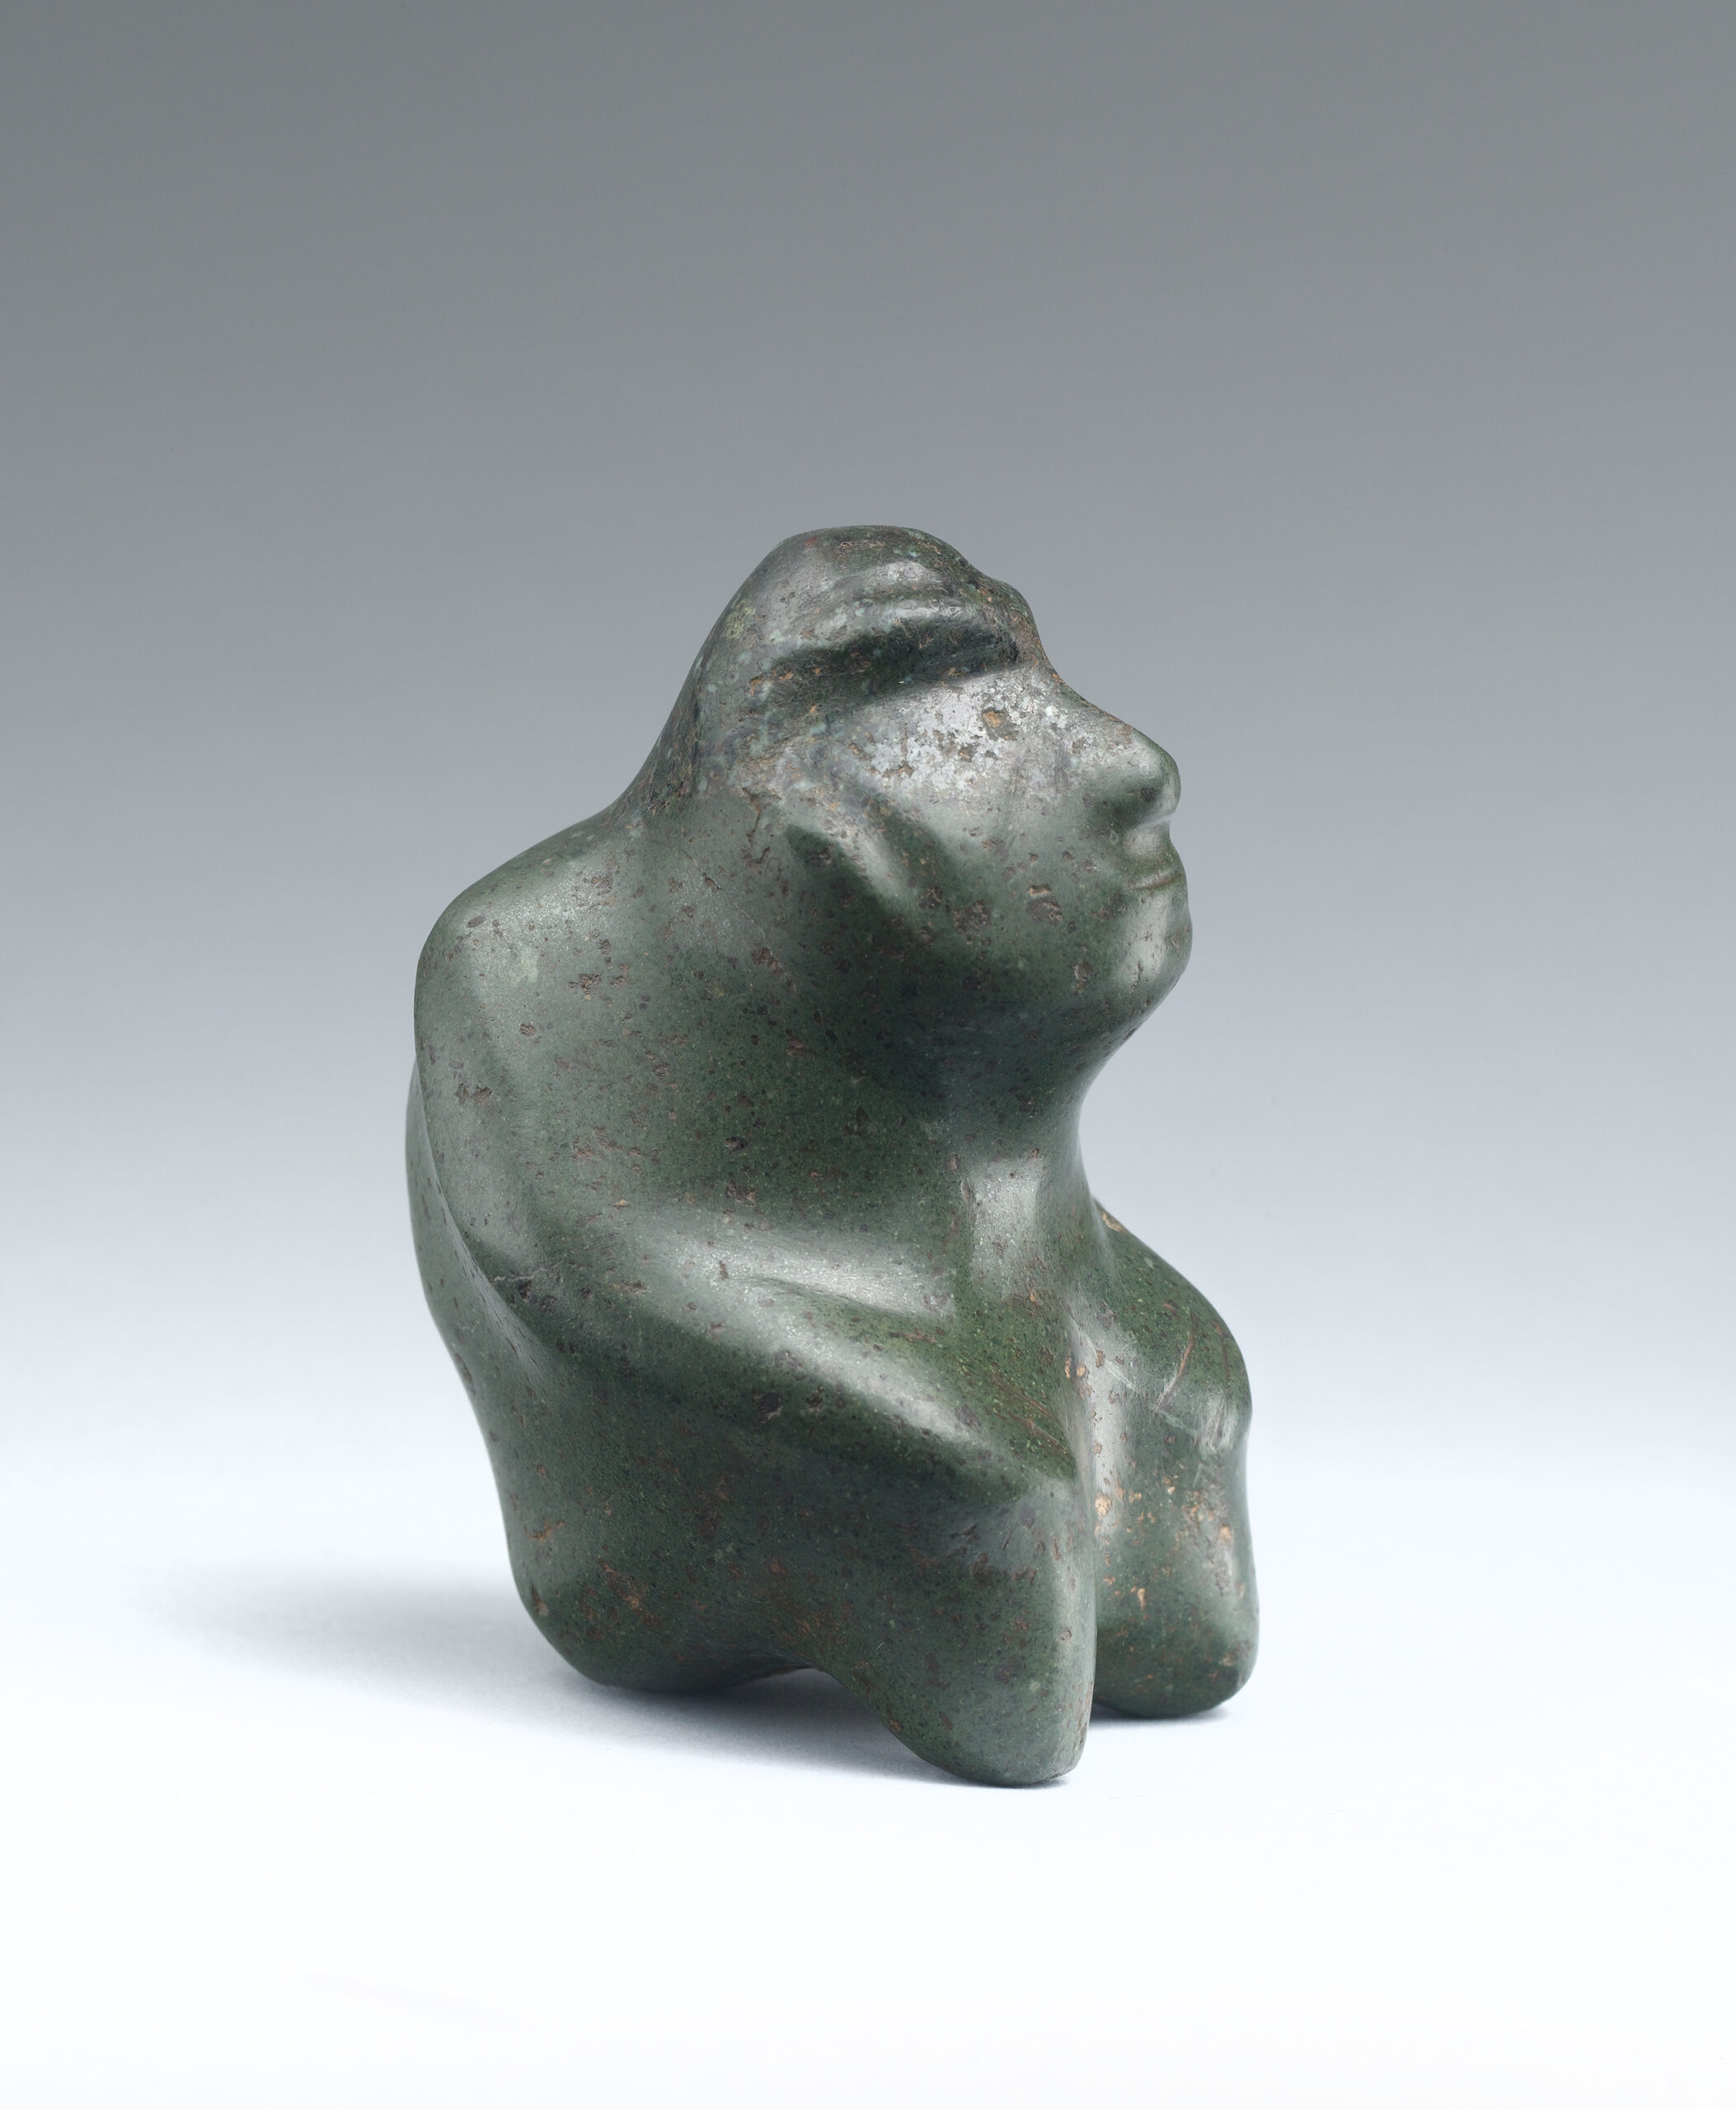 Abstract seated stone figure with a hunched back, naturalistic facial features, and arms resting on the knees.